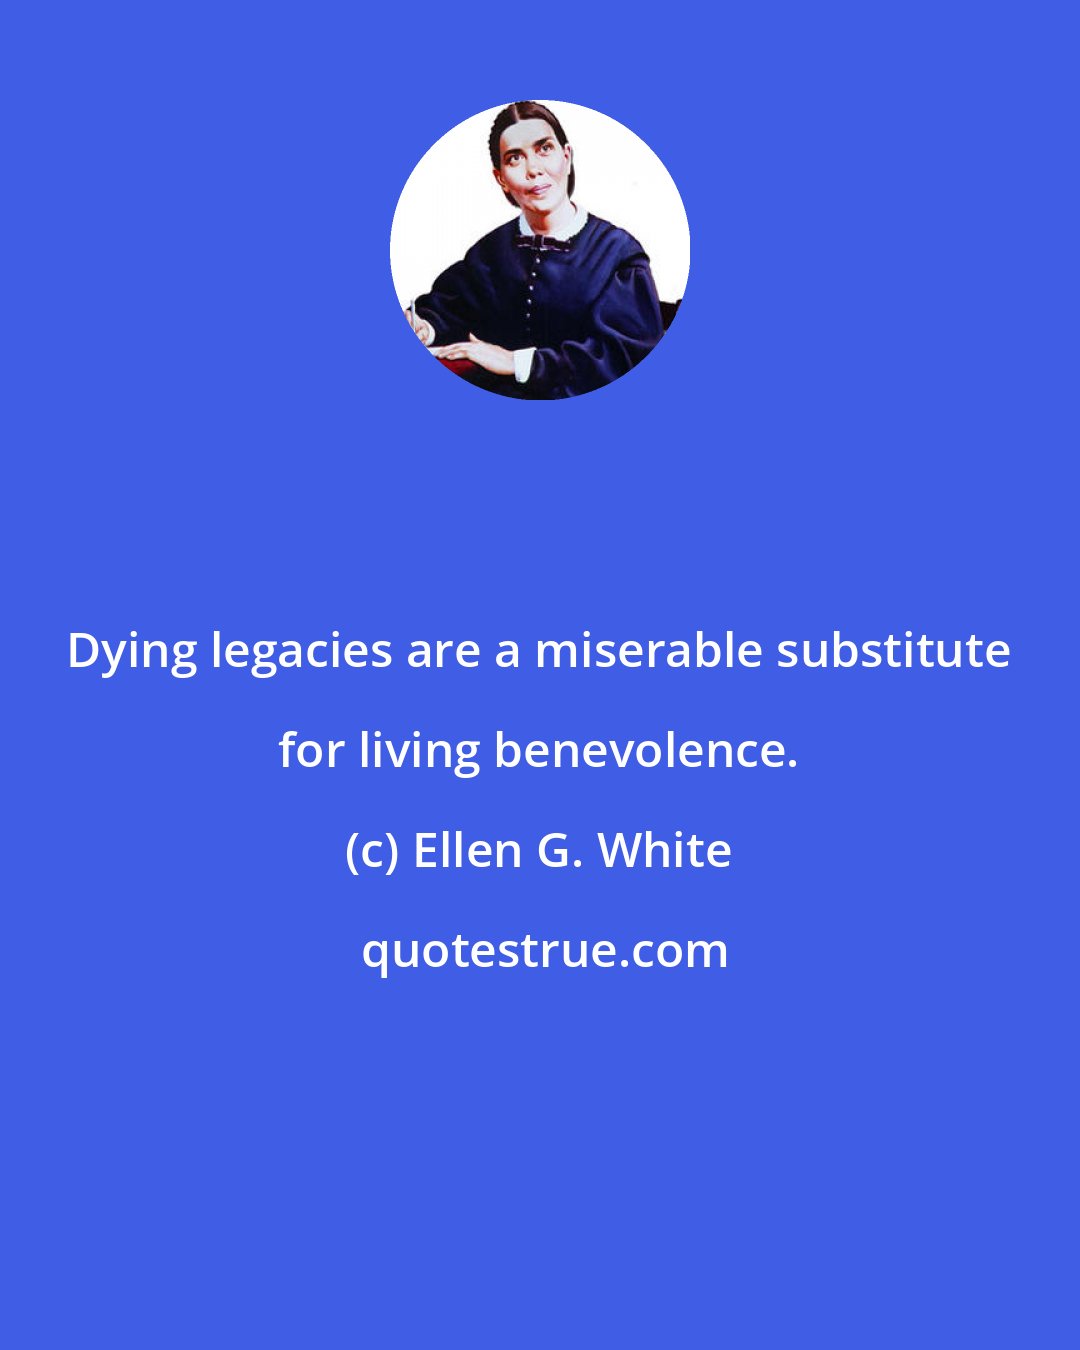 Ellen G. White: Dying legacies are a miserable substitute for living benevolence.